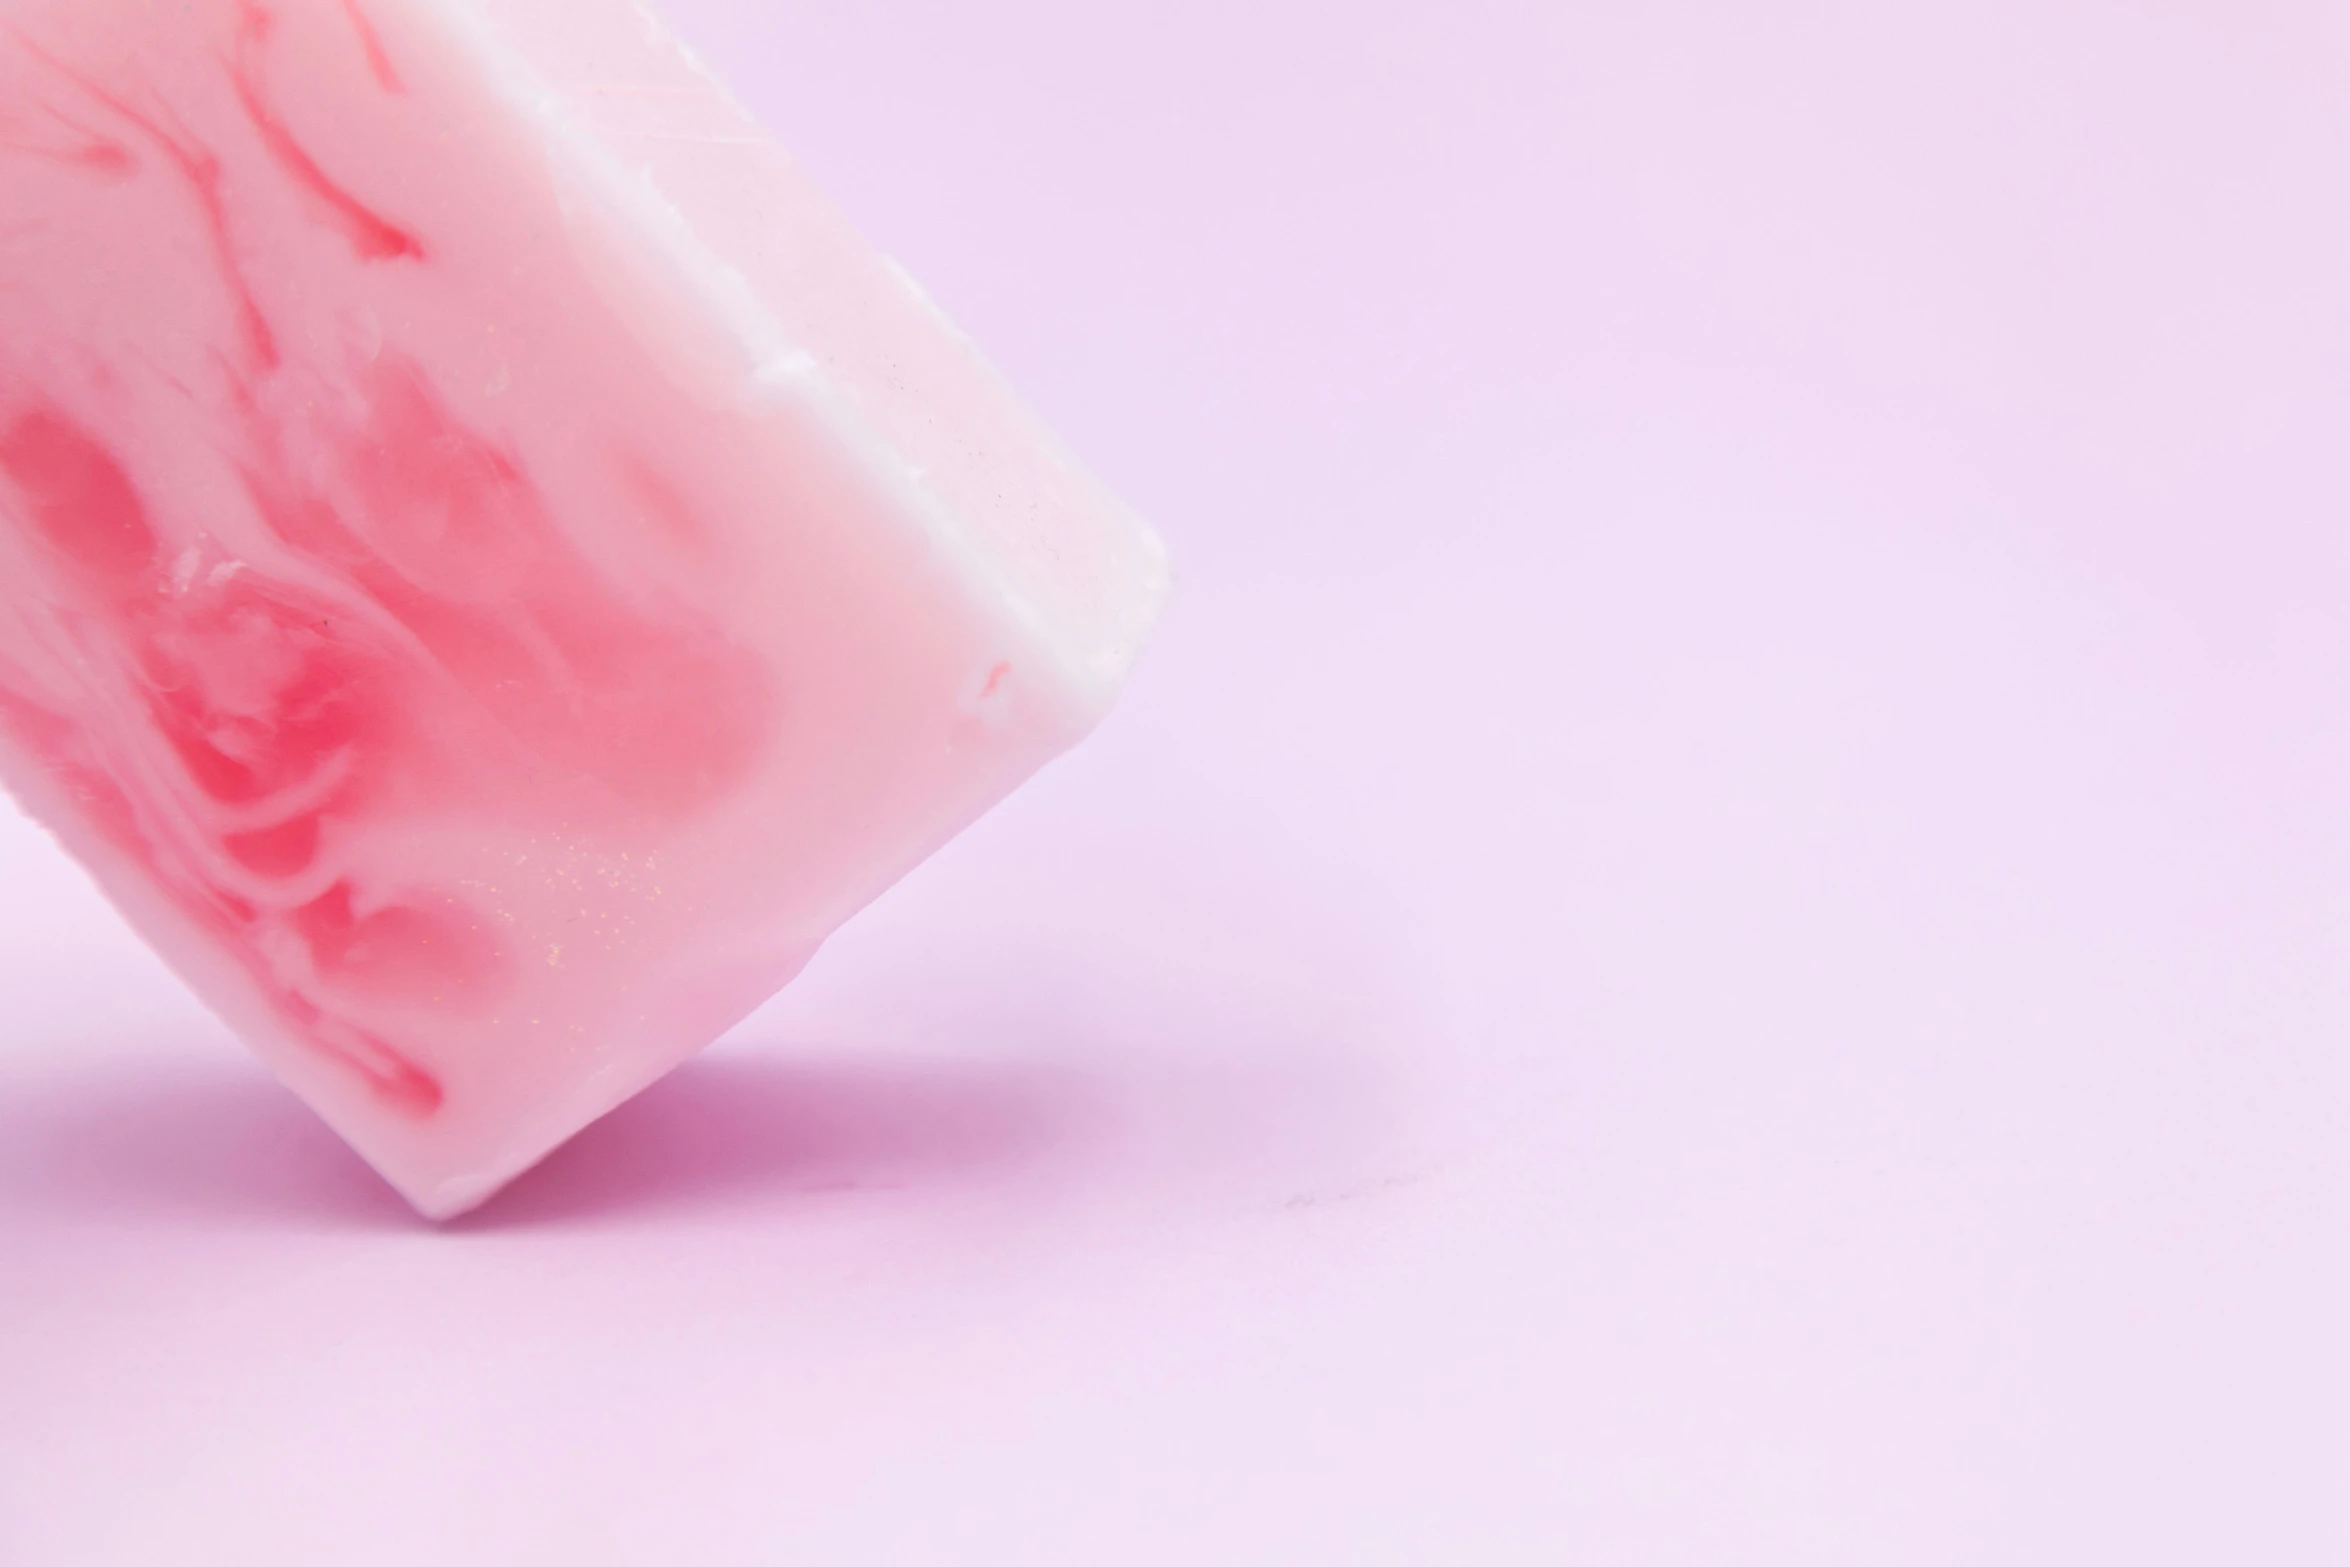 an unidentifiable bar of soap on top of a pink surface